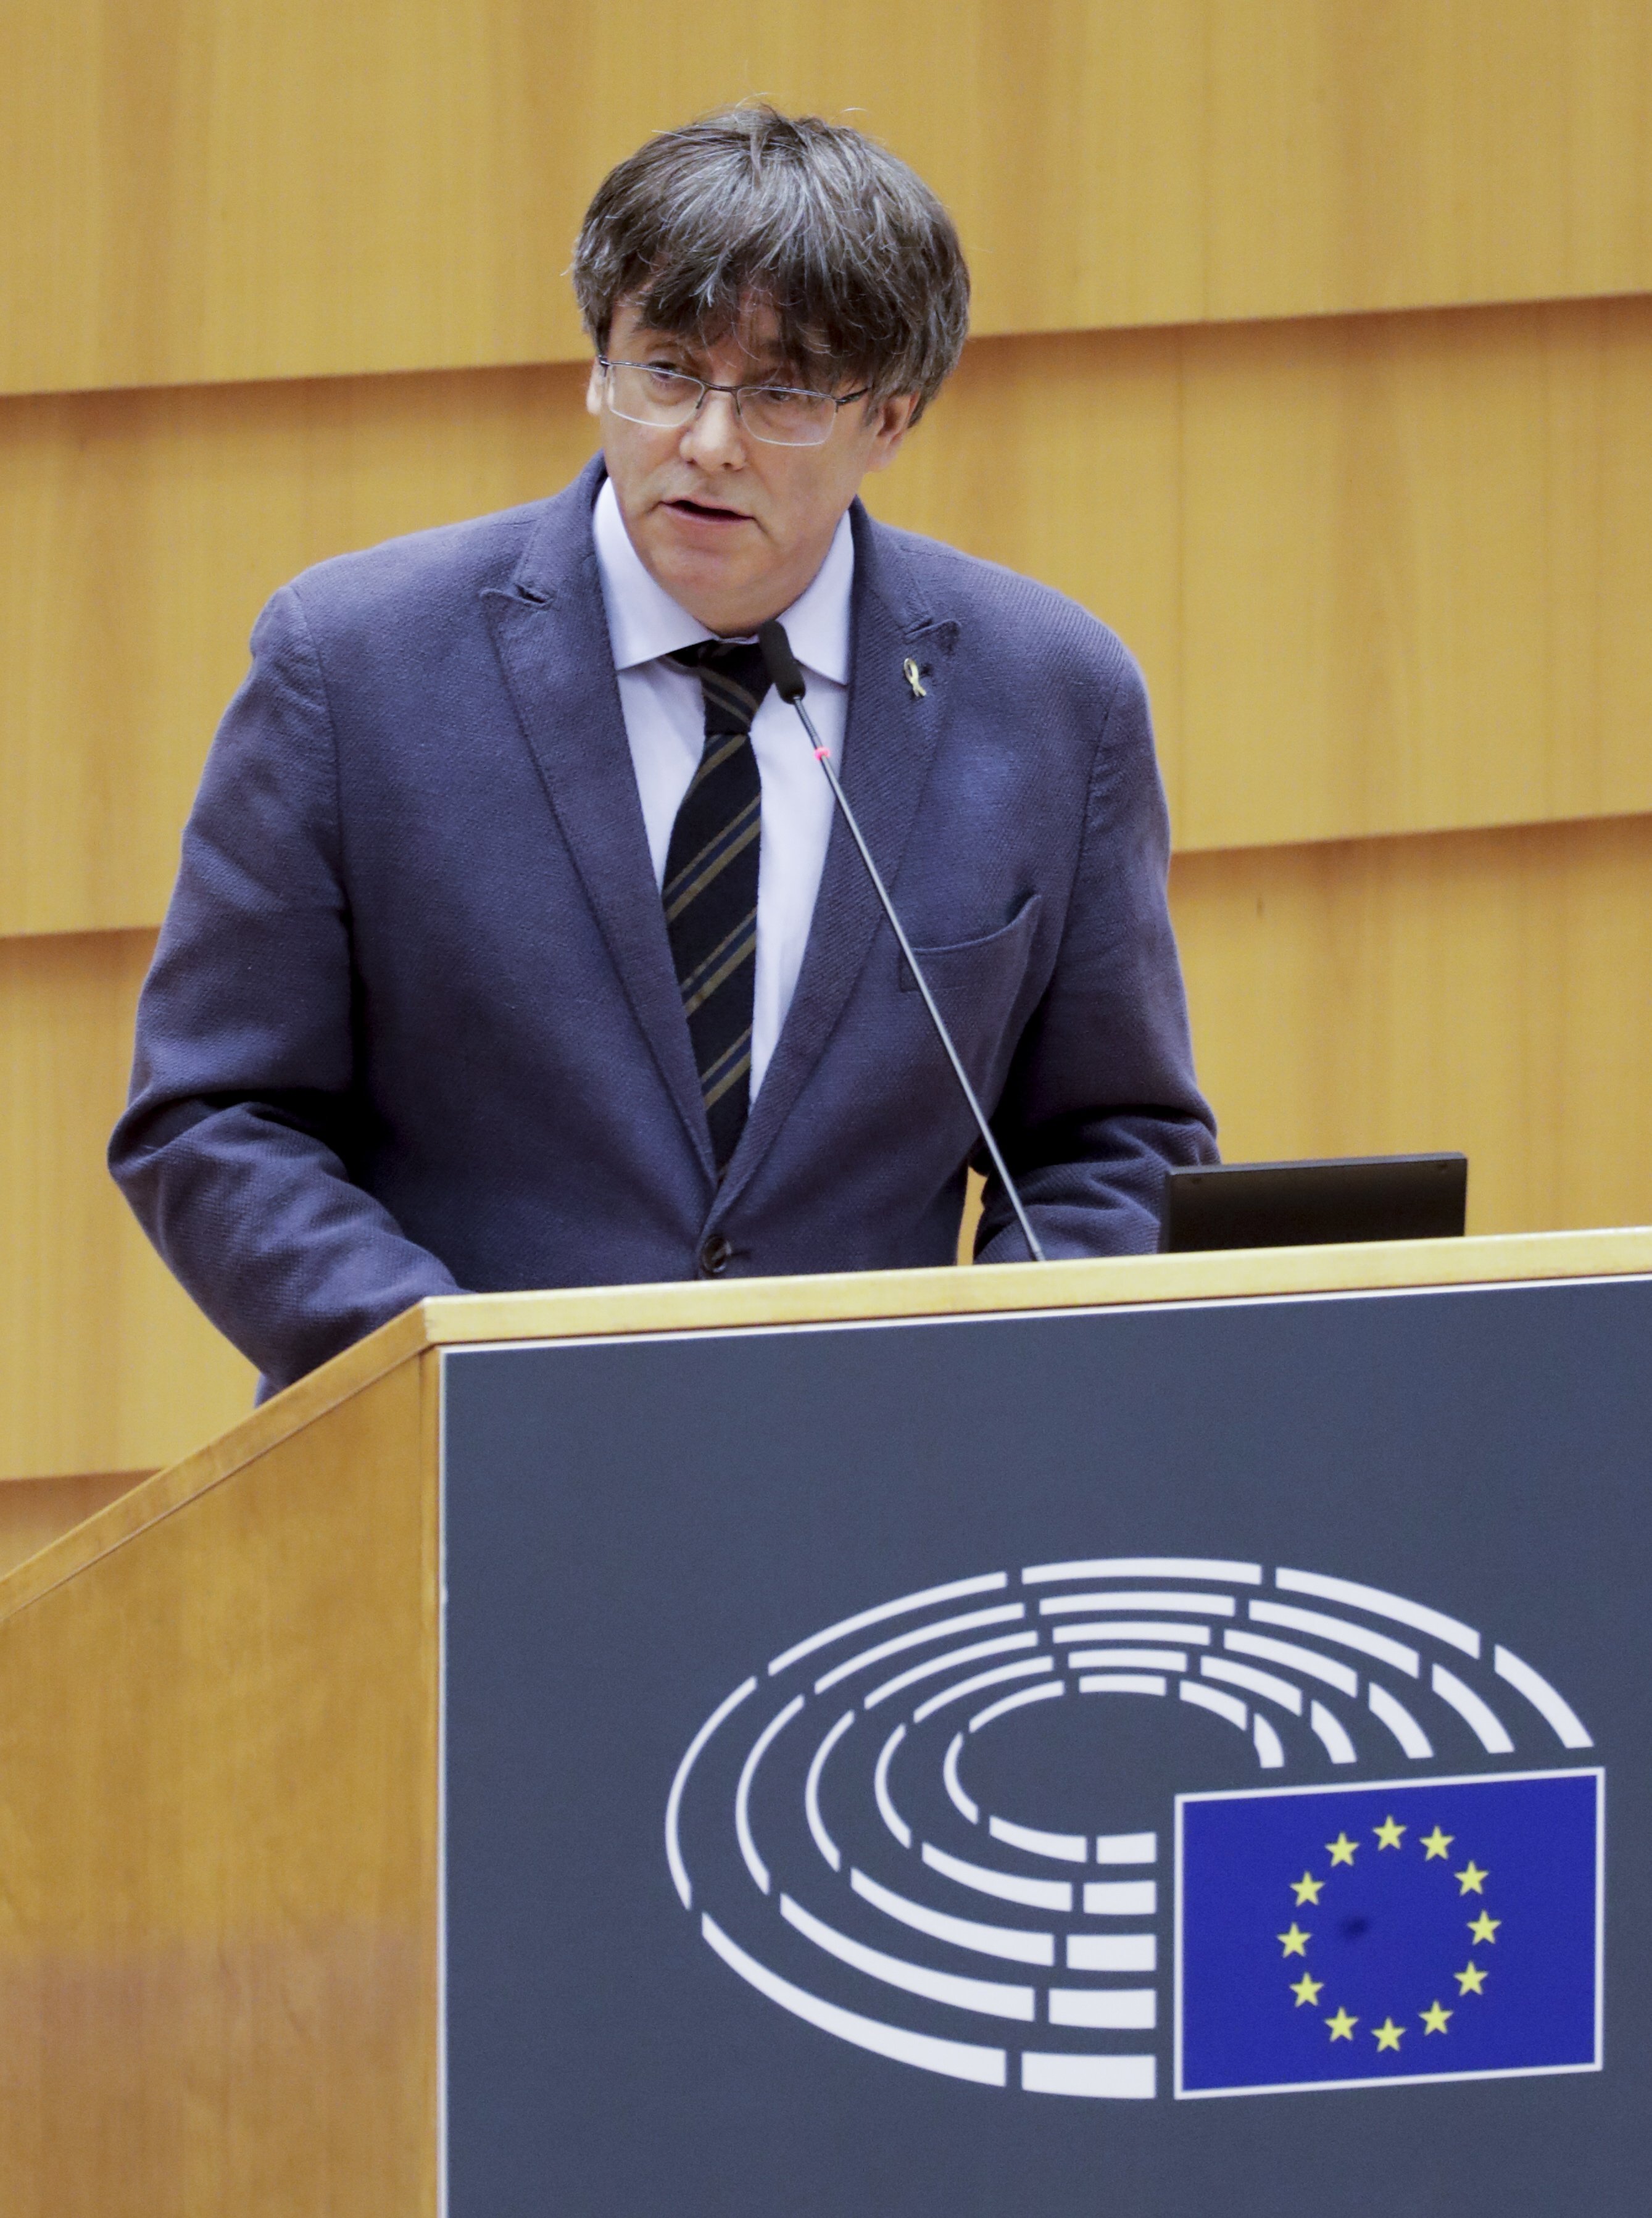 Podemos, PNV and Bildu MEPs cast votes against lifting the immunity of Puigdemont